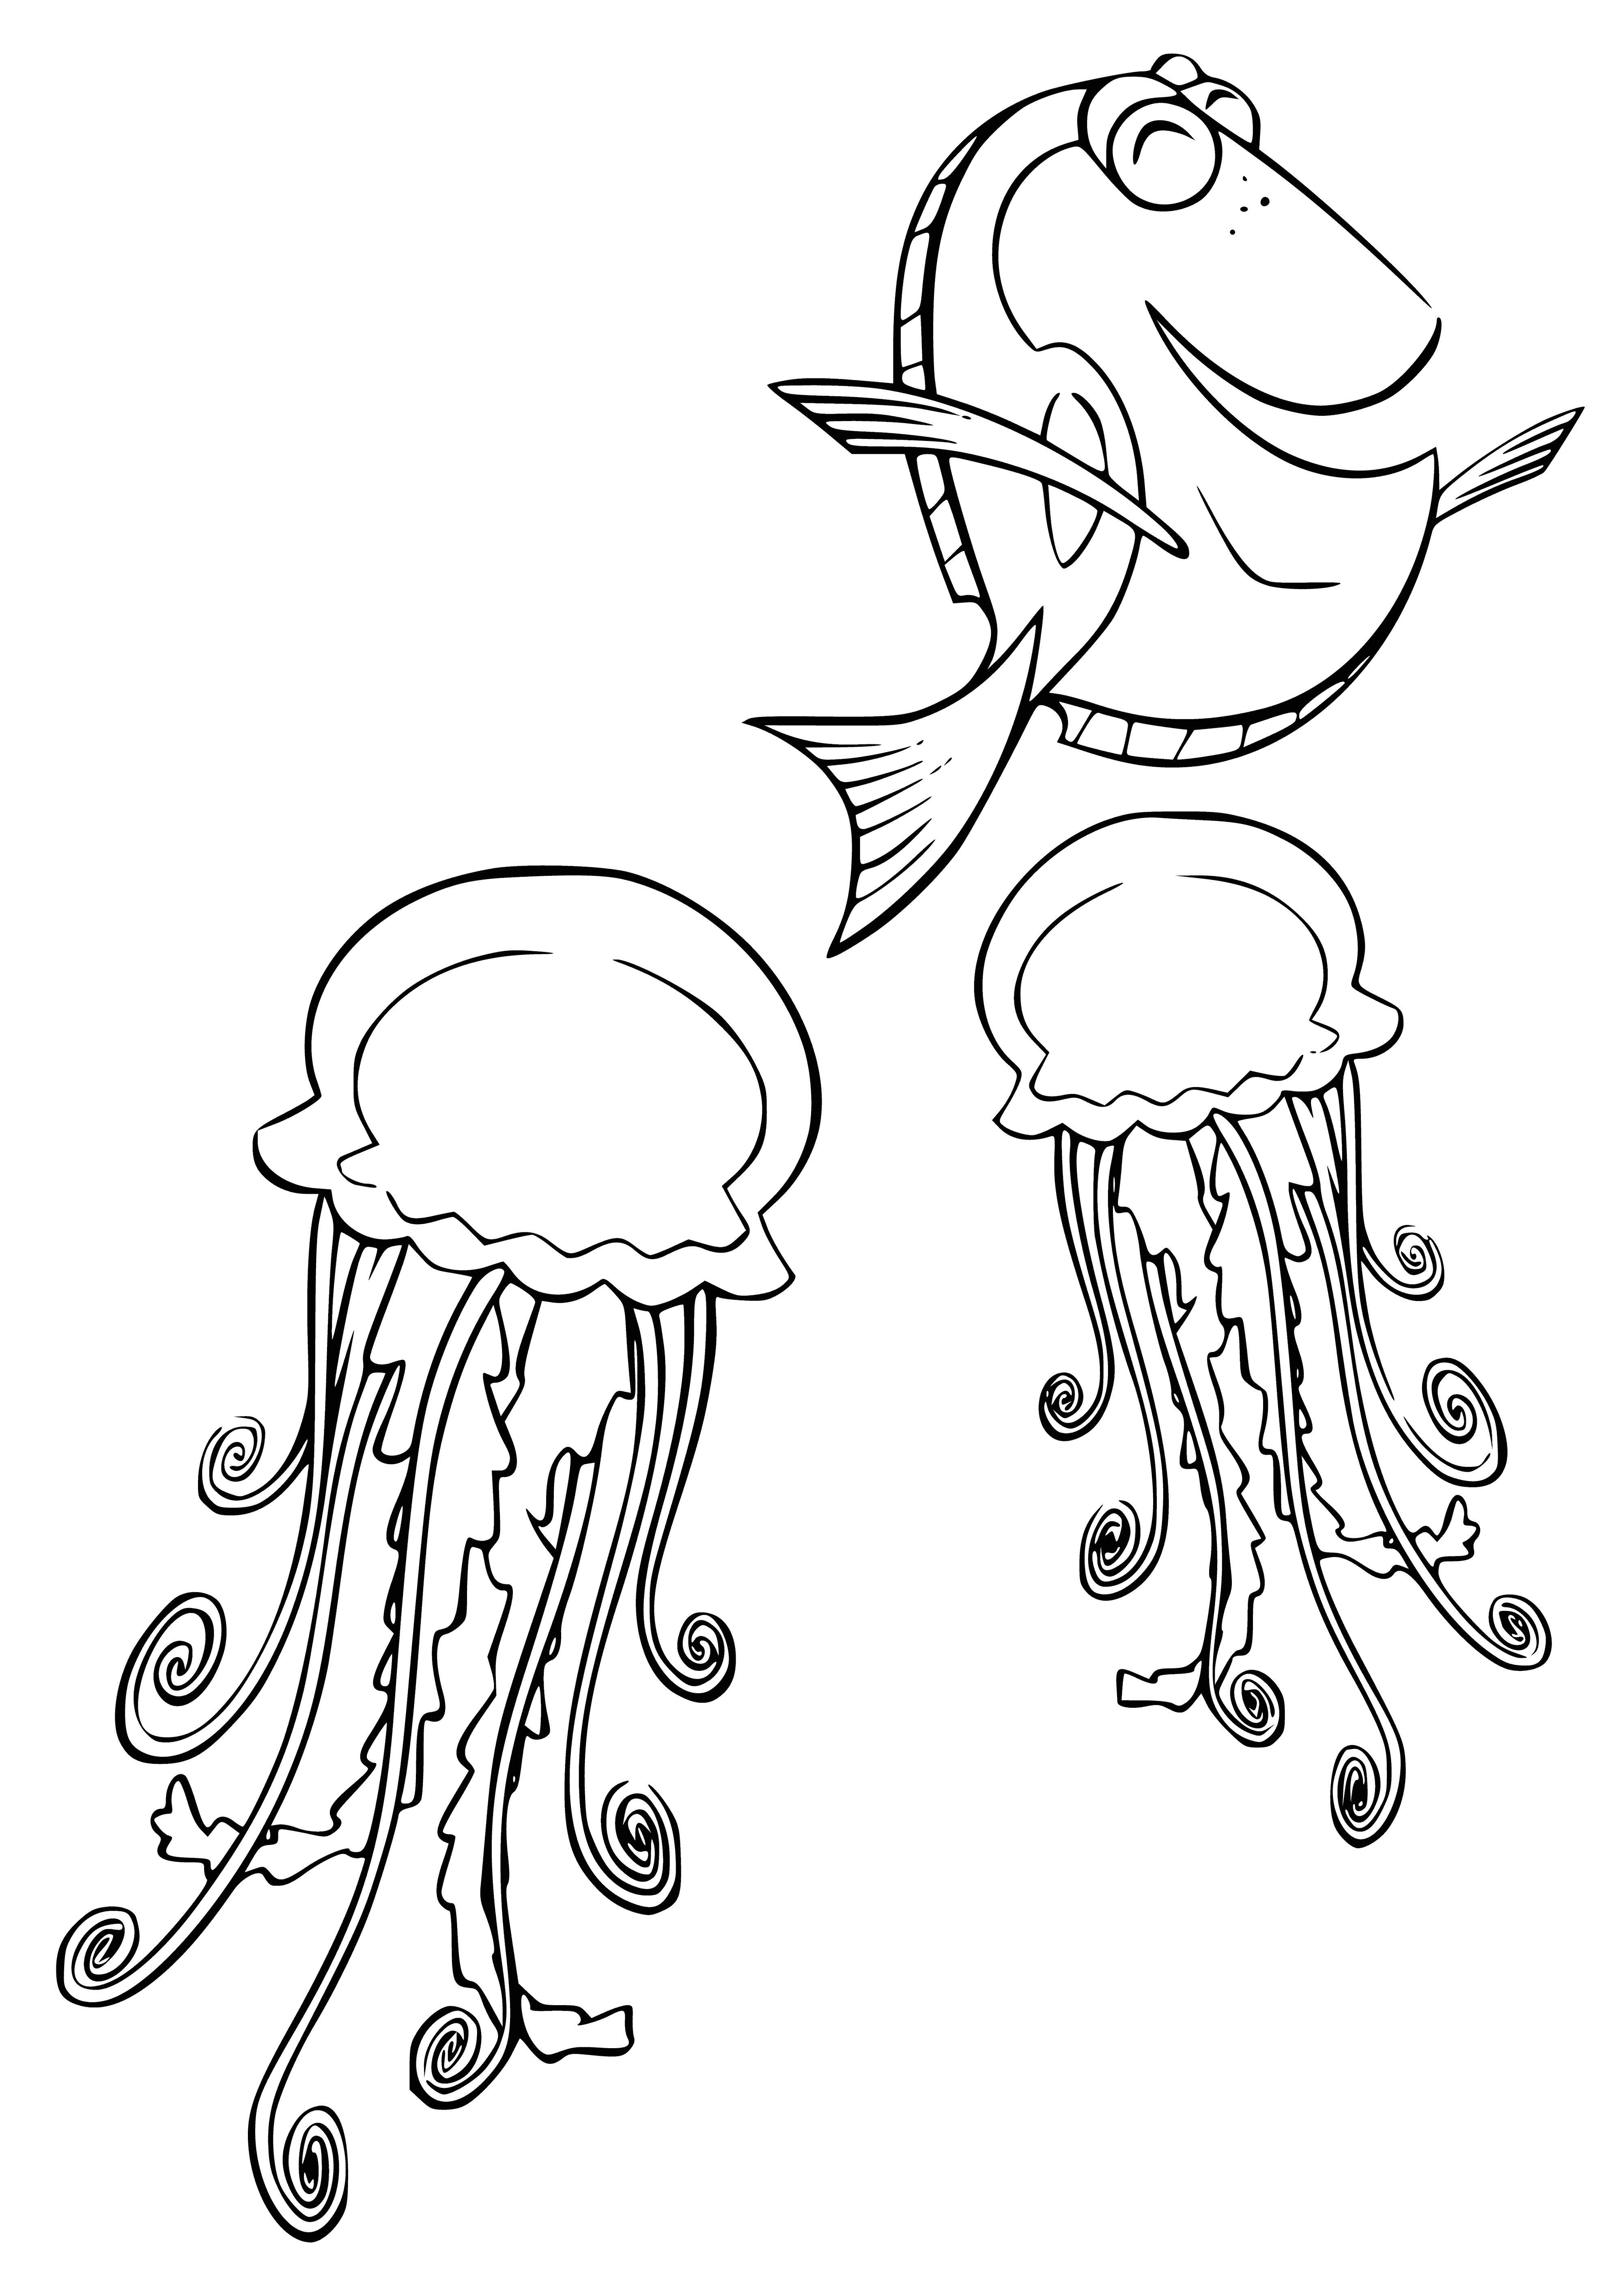 Dory and jellyfish coloring page